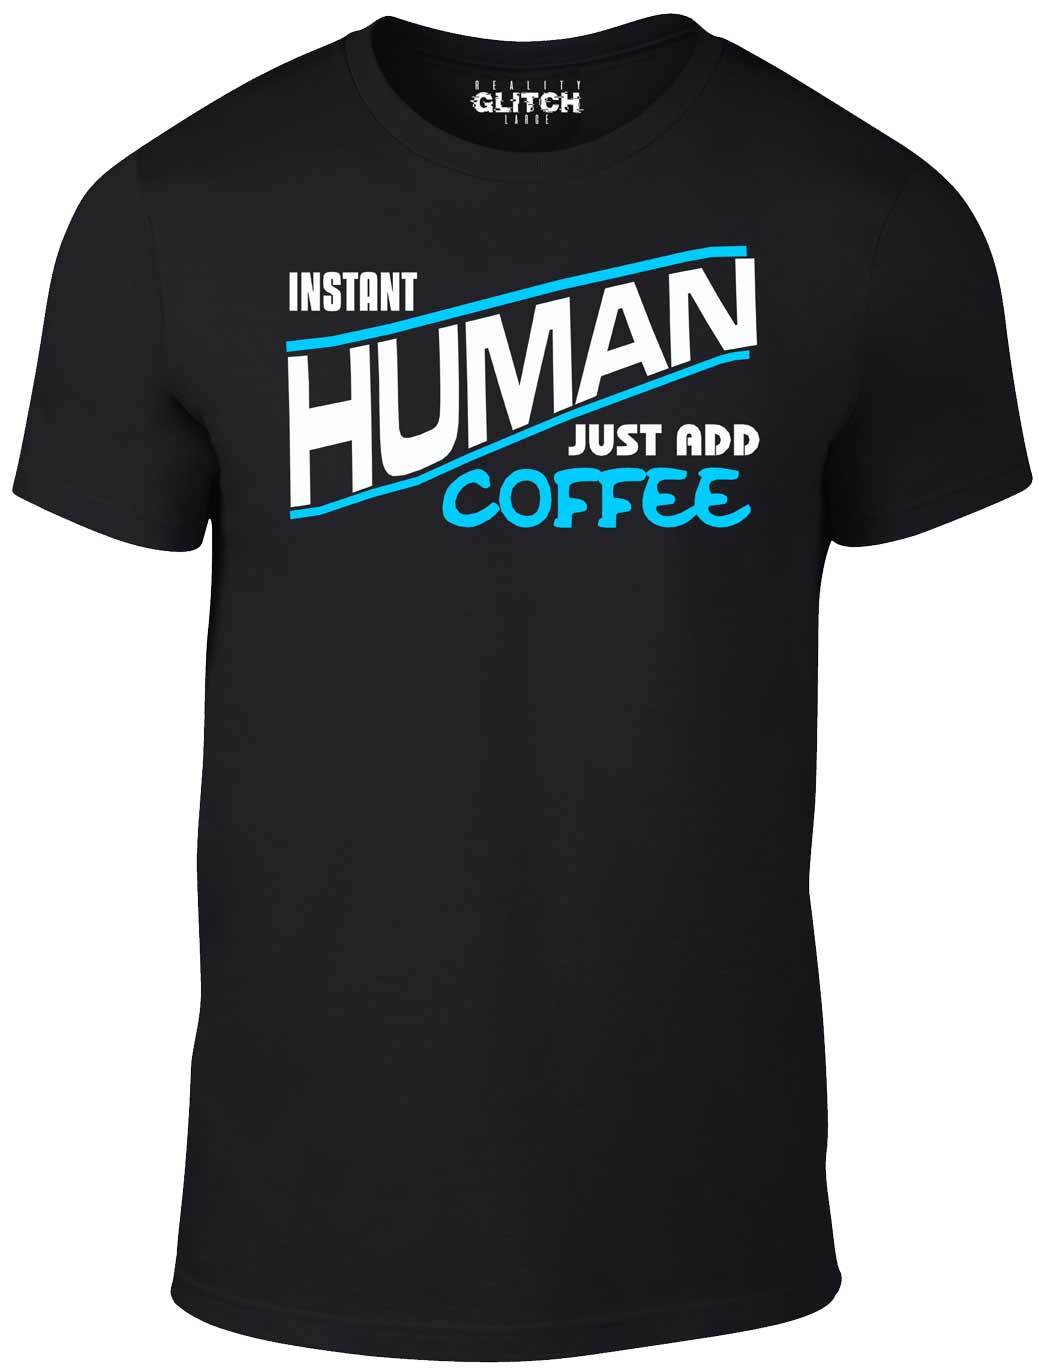 Men's Black T-Shirt With a Instant Human, Just Add Coffee  Printed Design